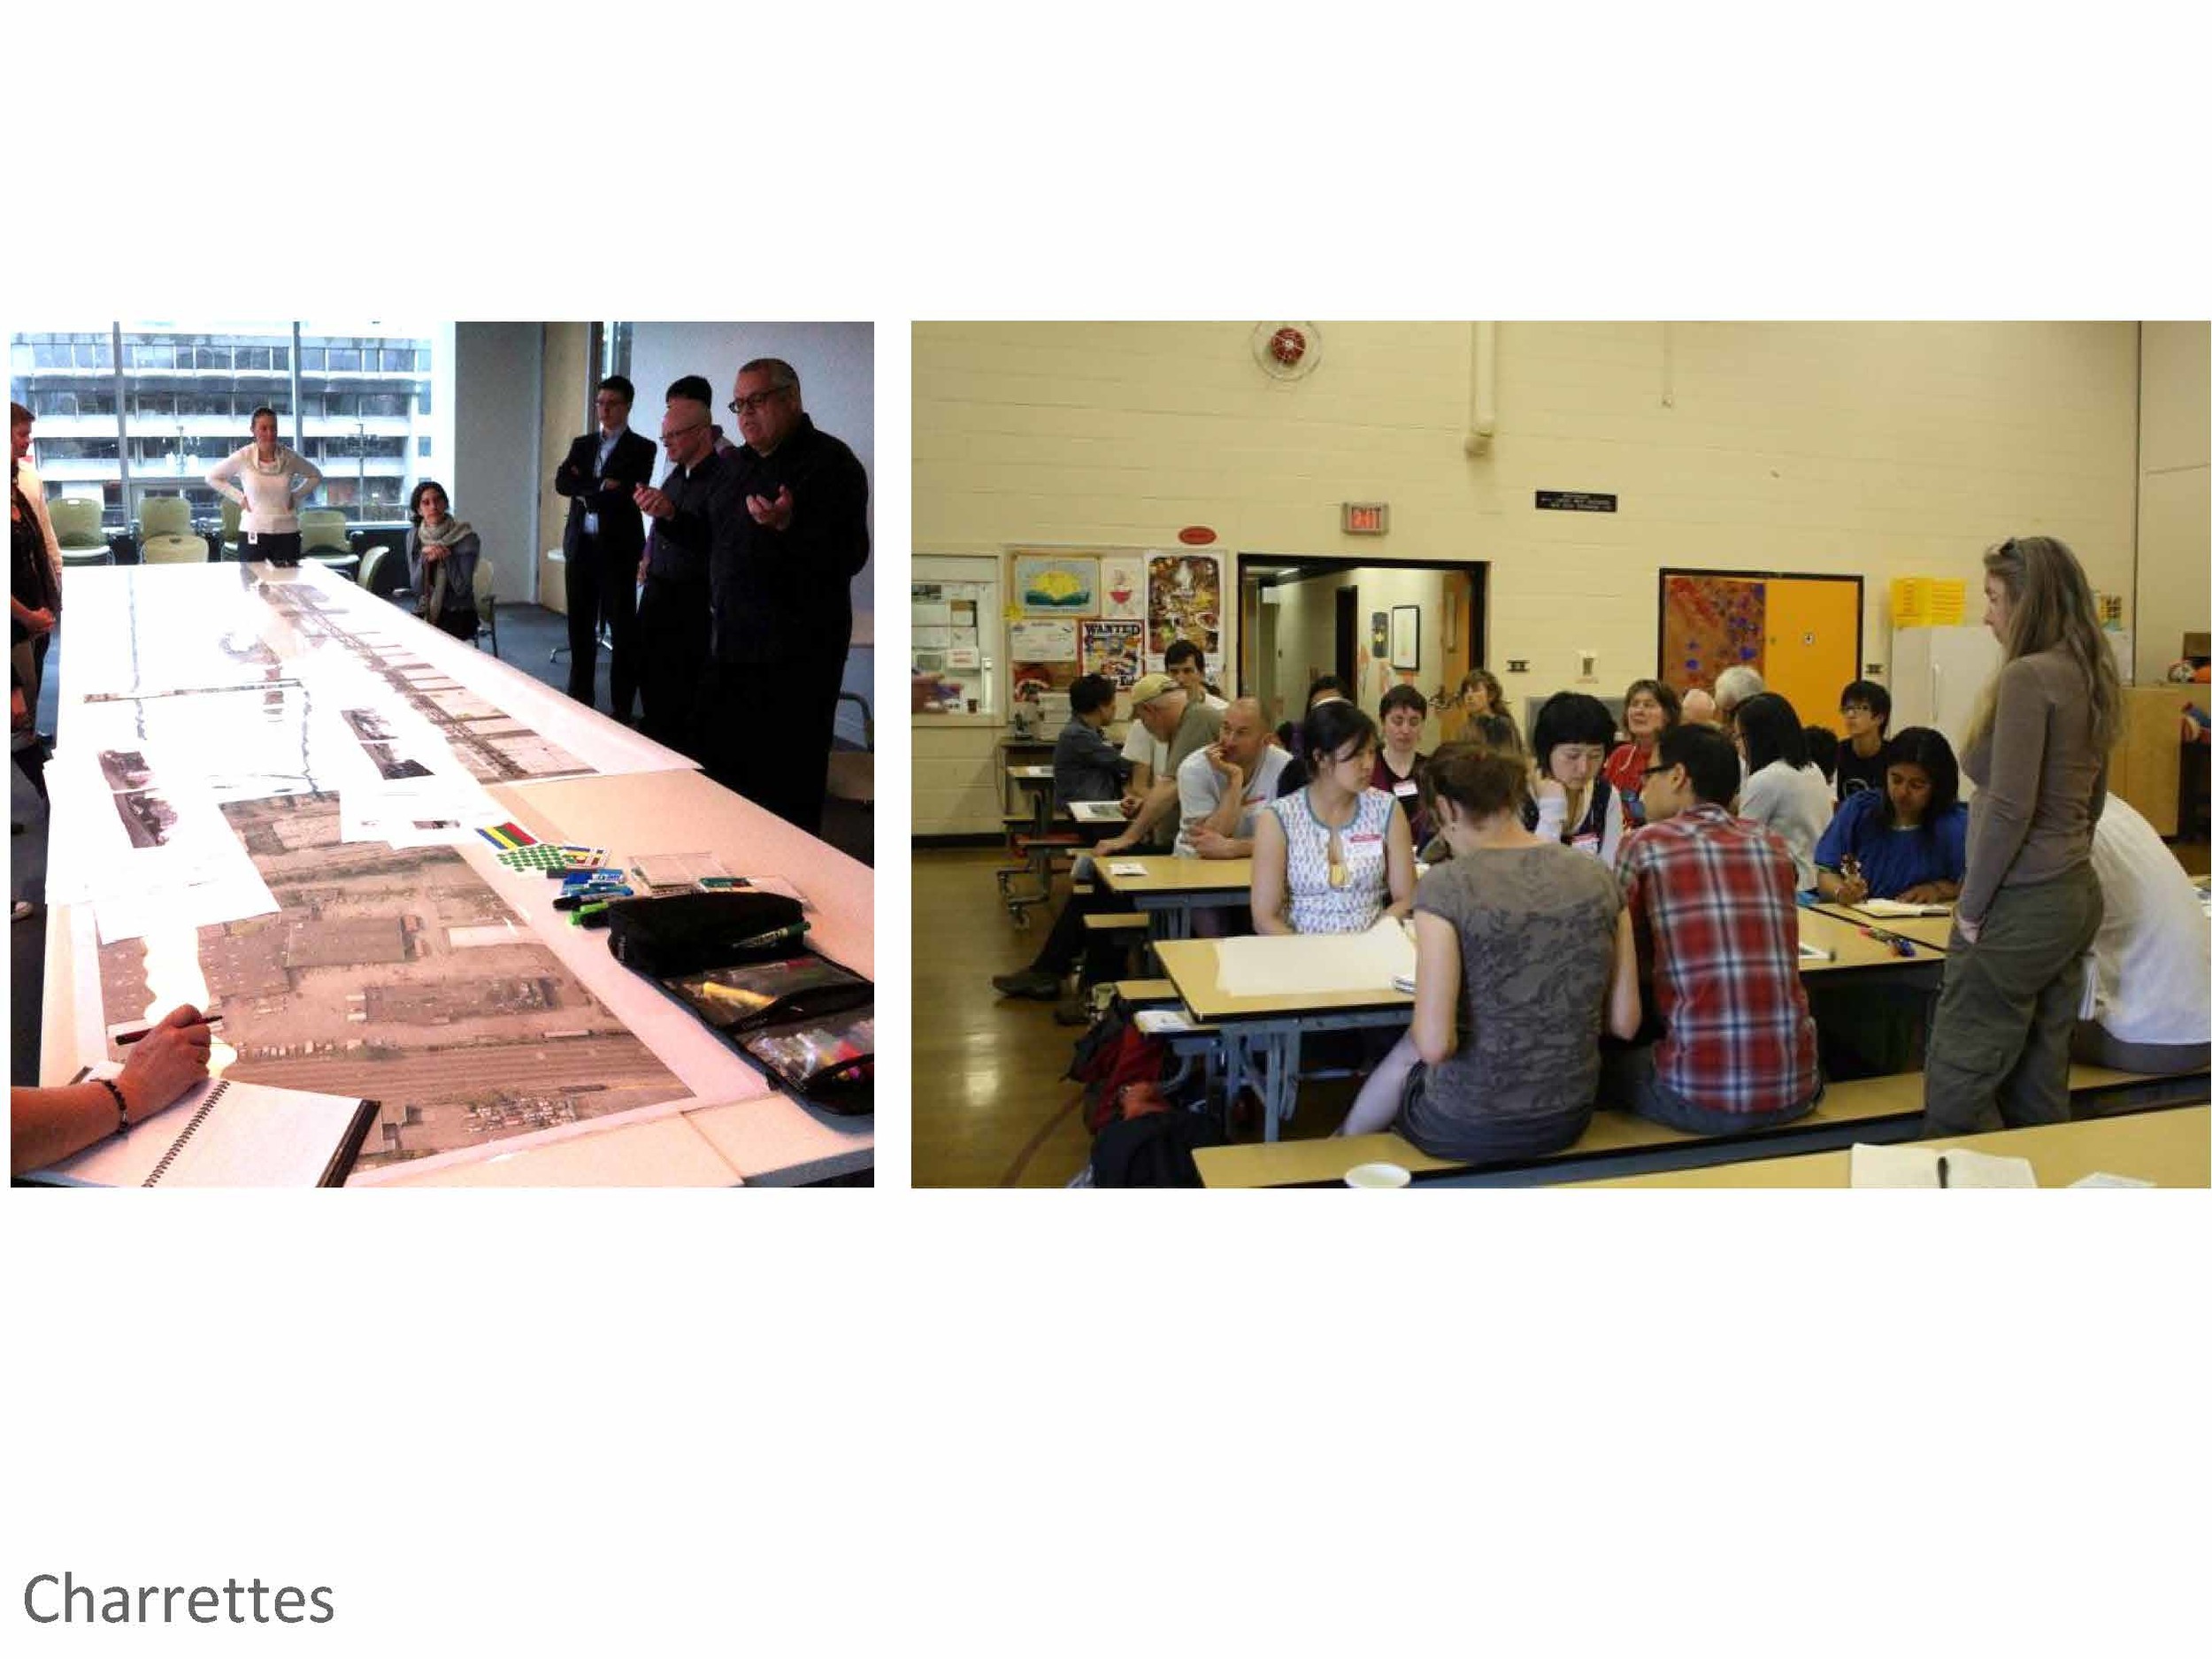  With support from the city, we were able to hold several community design events to explore ideas of potential street redesign. The concept drawings that emerged became a helpful visual tool to talk about the Rainway at neighbourhood events such as 